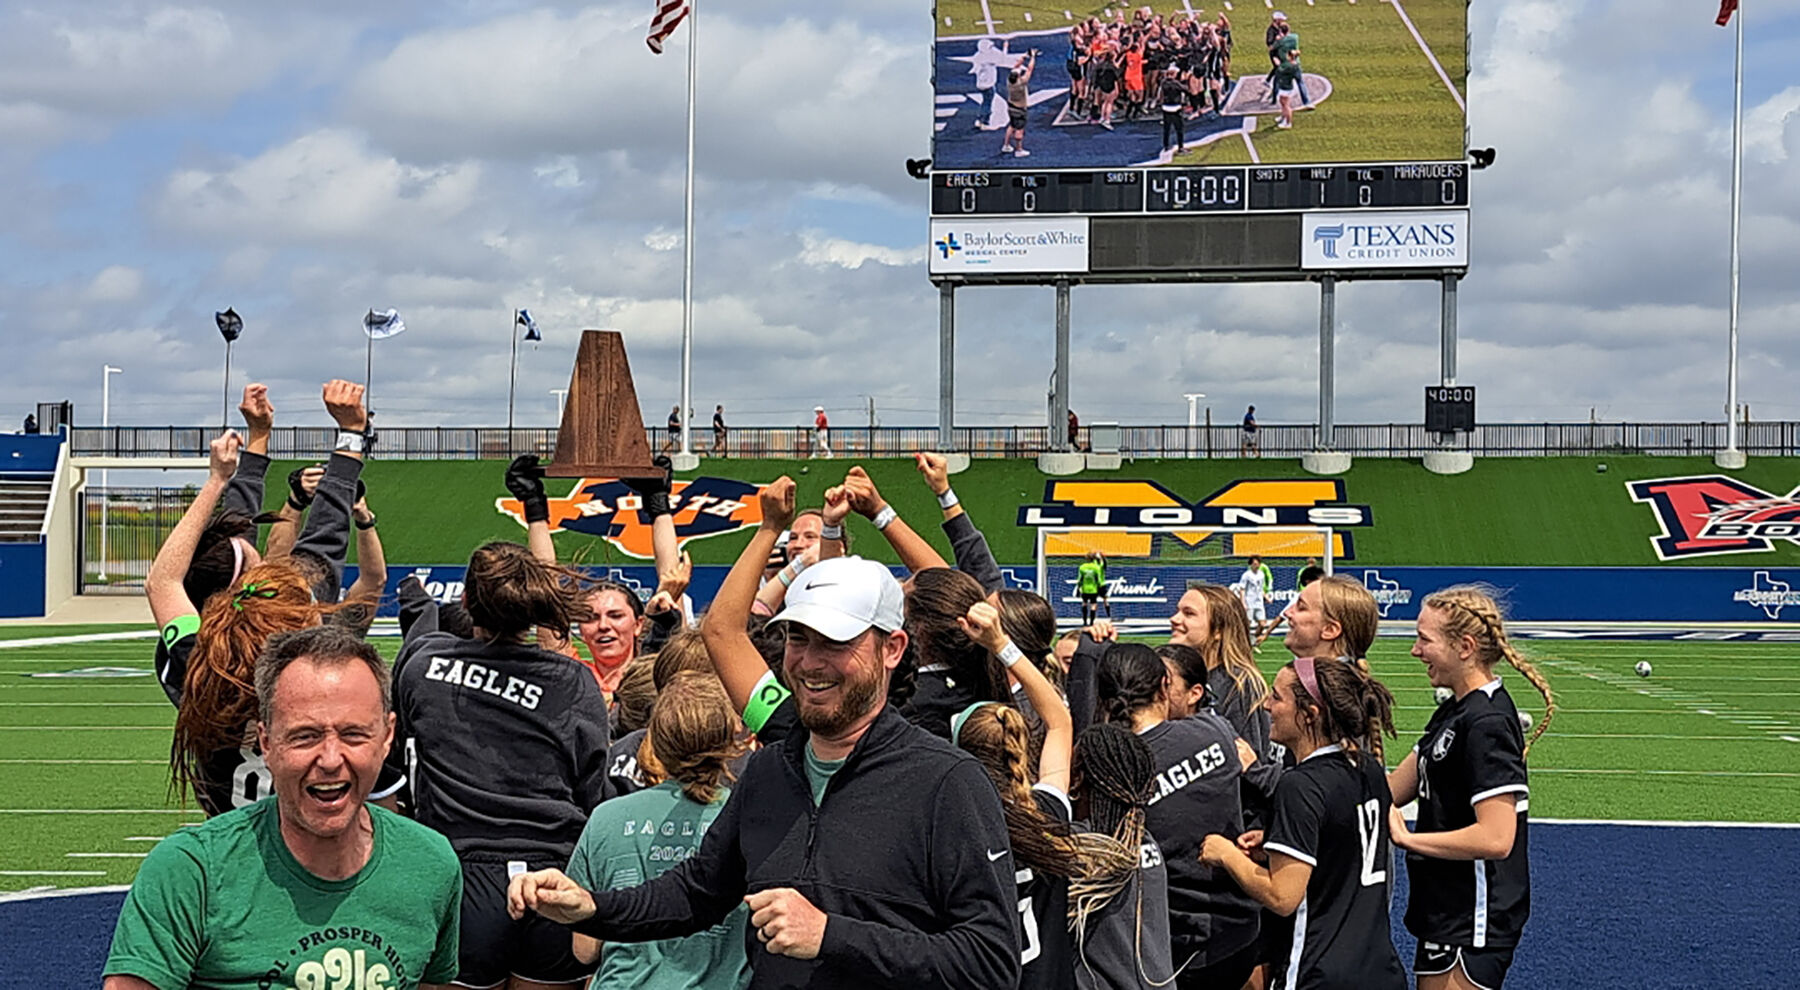 See you in Georgetown: Prosper tops Marcus in PKs, takes historic season to state tournament